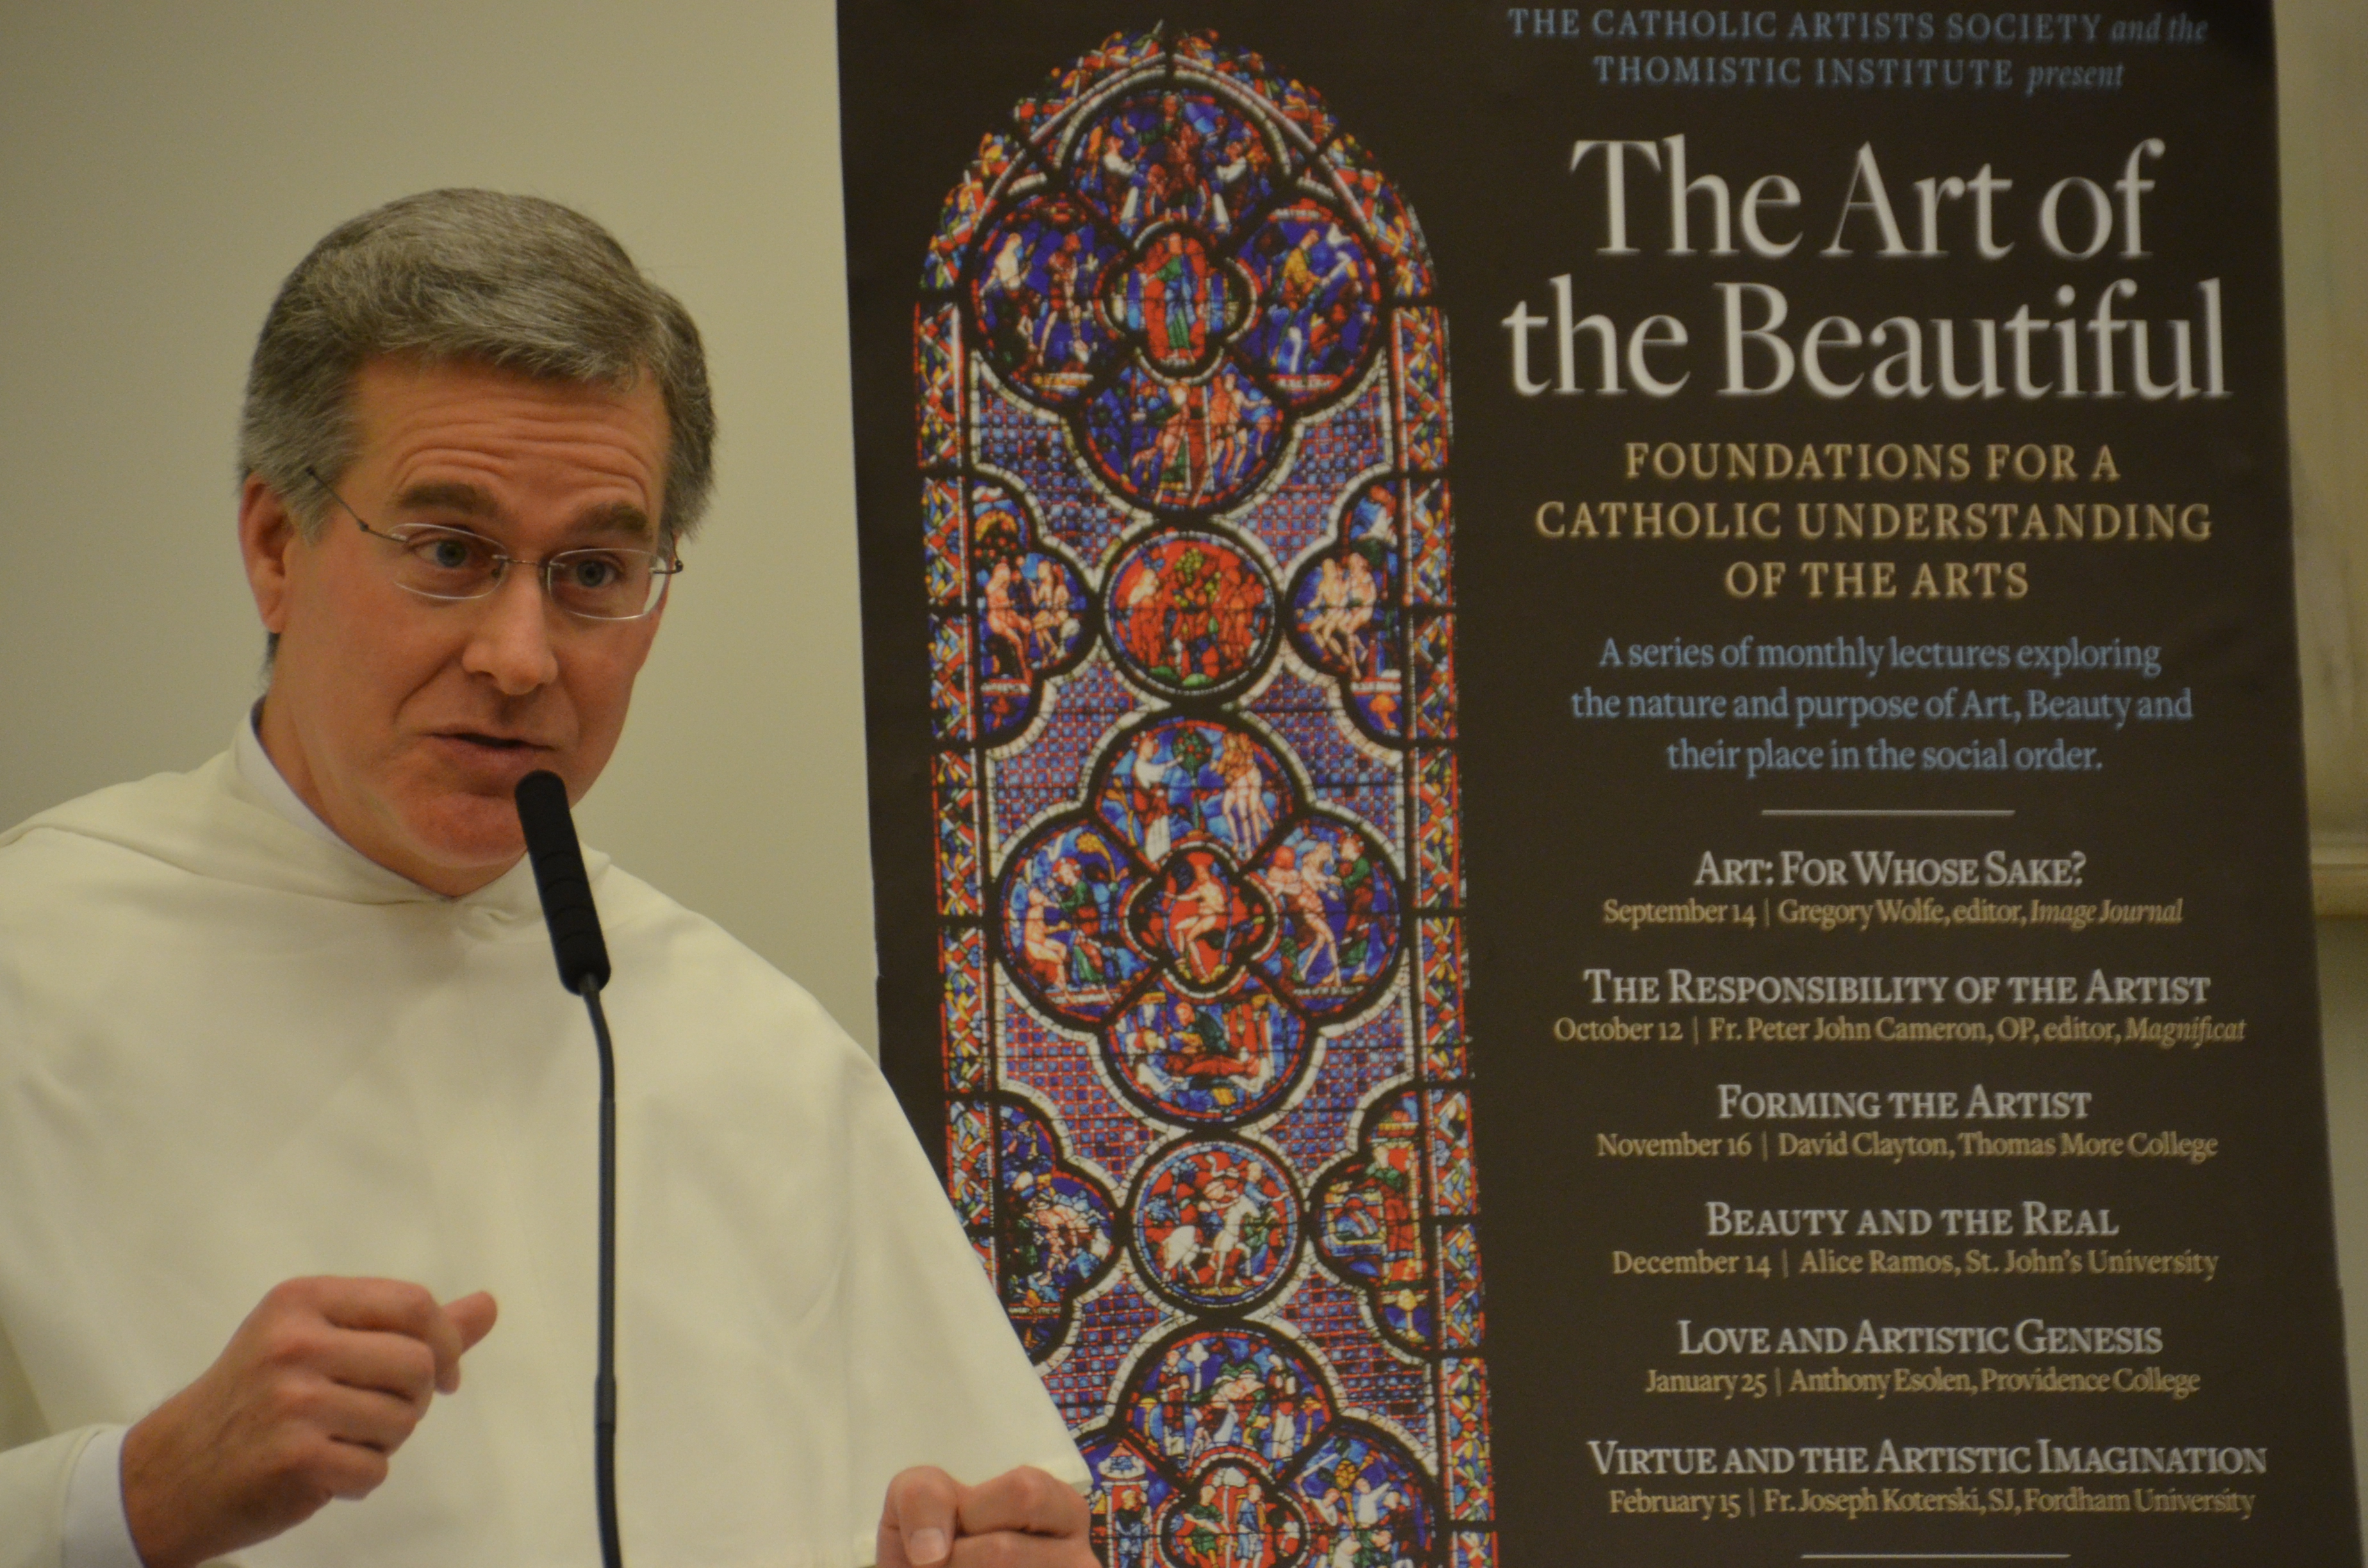 The Responsibility of the Artist” with Rev. Peter John Cameron, OP